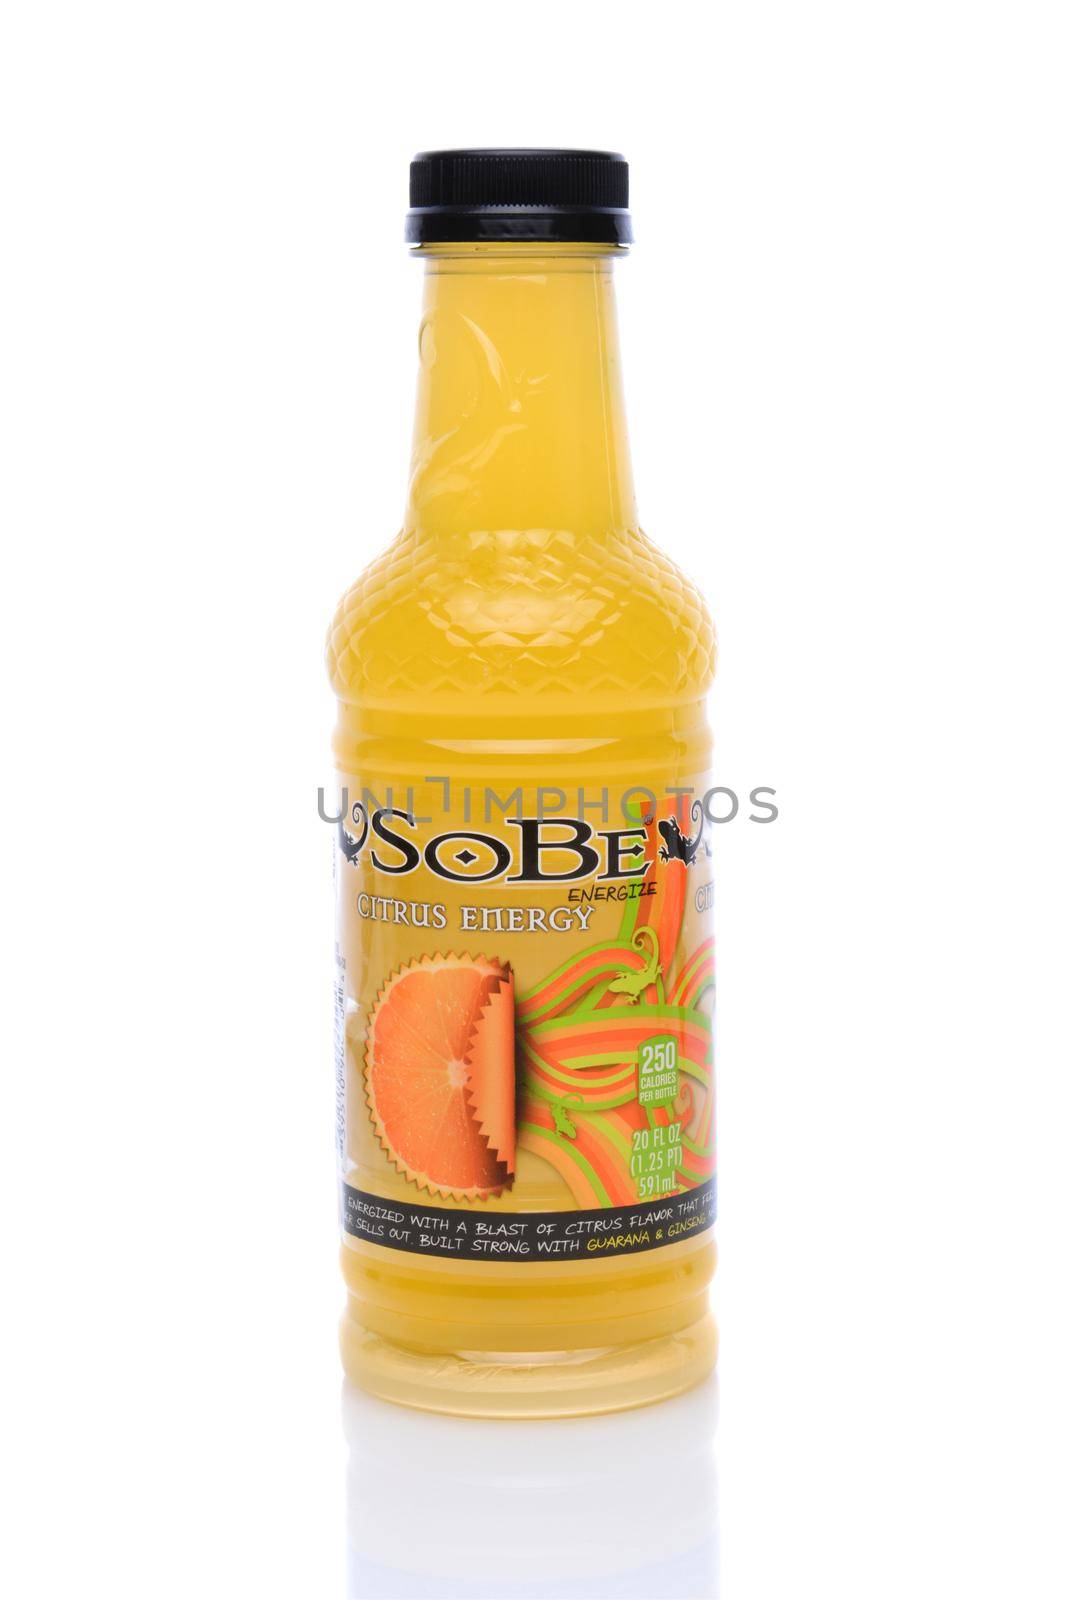 IRVINE, CA - MAY 14, 2014: A Bottle of SoBe Citrus Energy Drink  The name SoBe is an abbreviation of South Beach, named after the upscale area of Miami Beach, Fl.